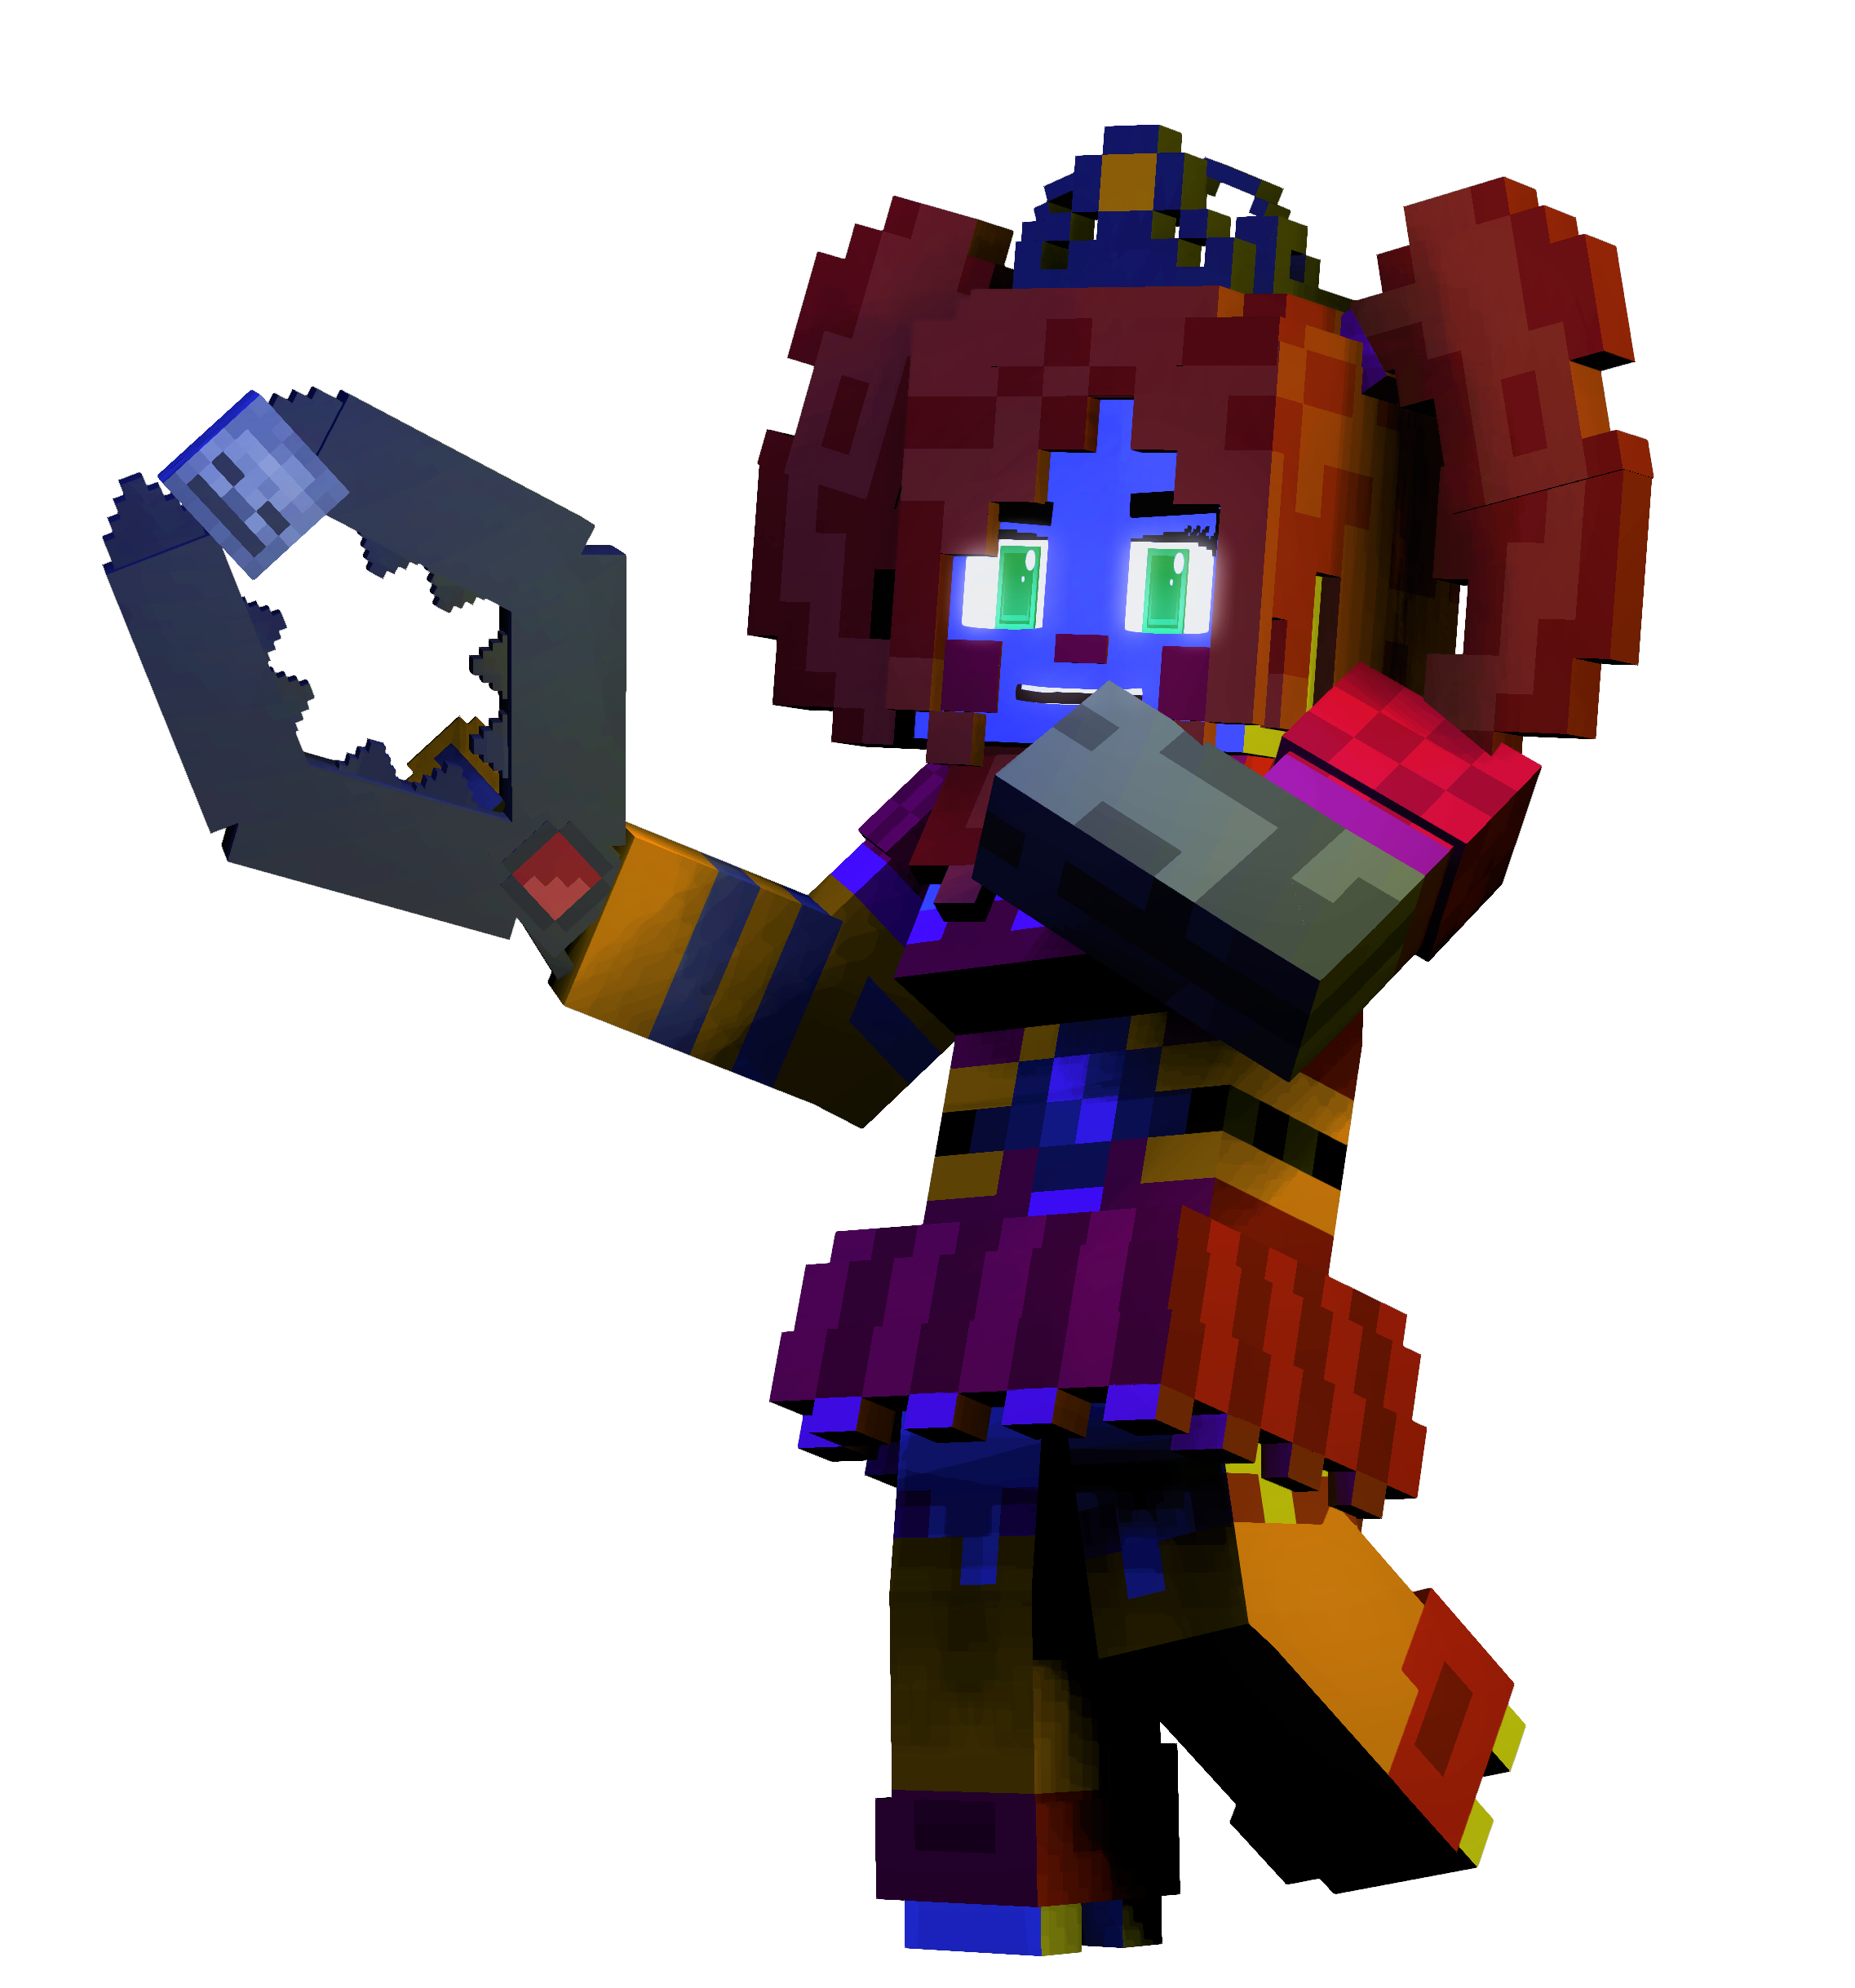 Five Nights In Anime 3D 2 Rigs (Fnia 3D 2 Rigs) - Rigs - Mine